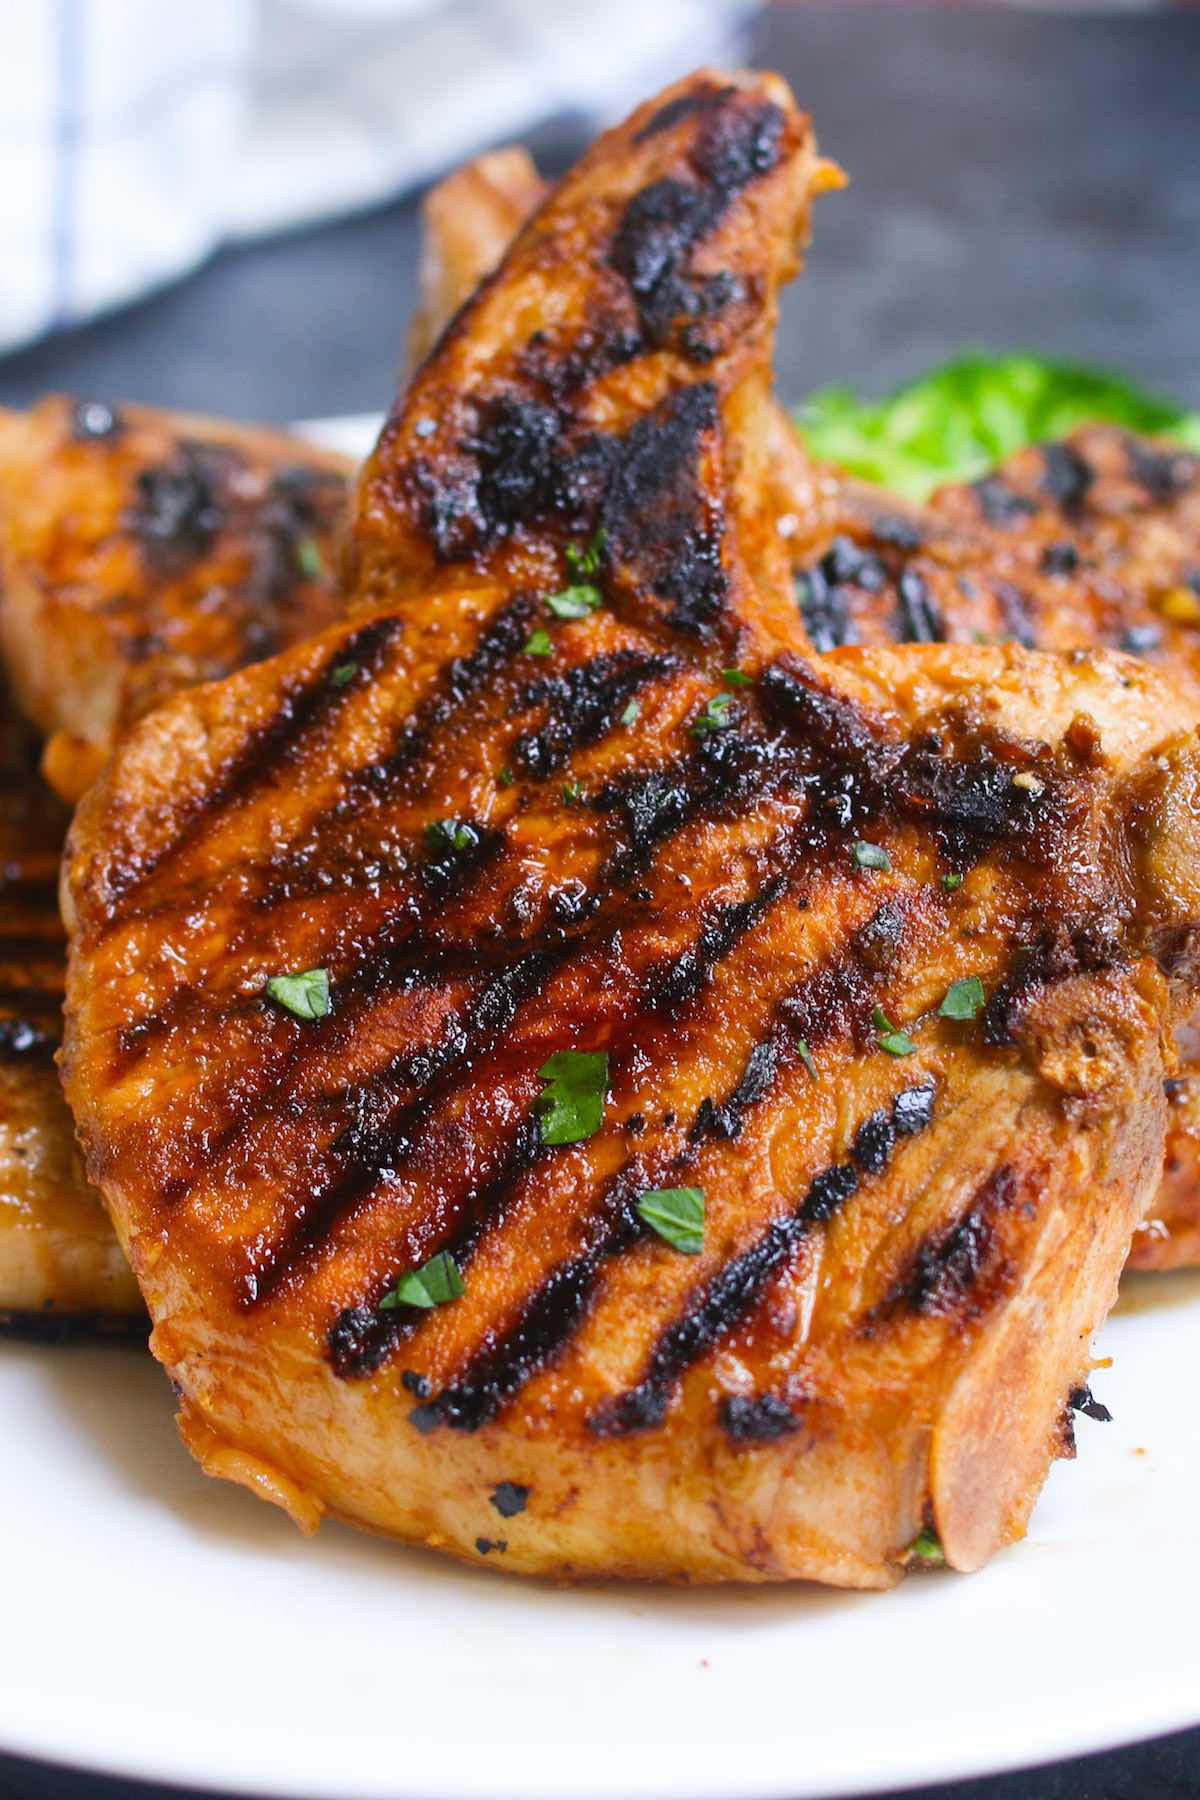 Best Ever Pork Chop Marinade So Tender And Juicy,Pictures Of Virginia Creeper Plant